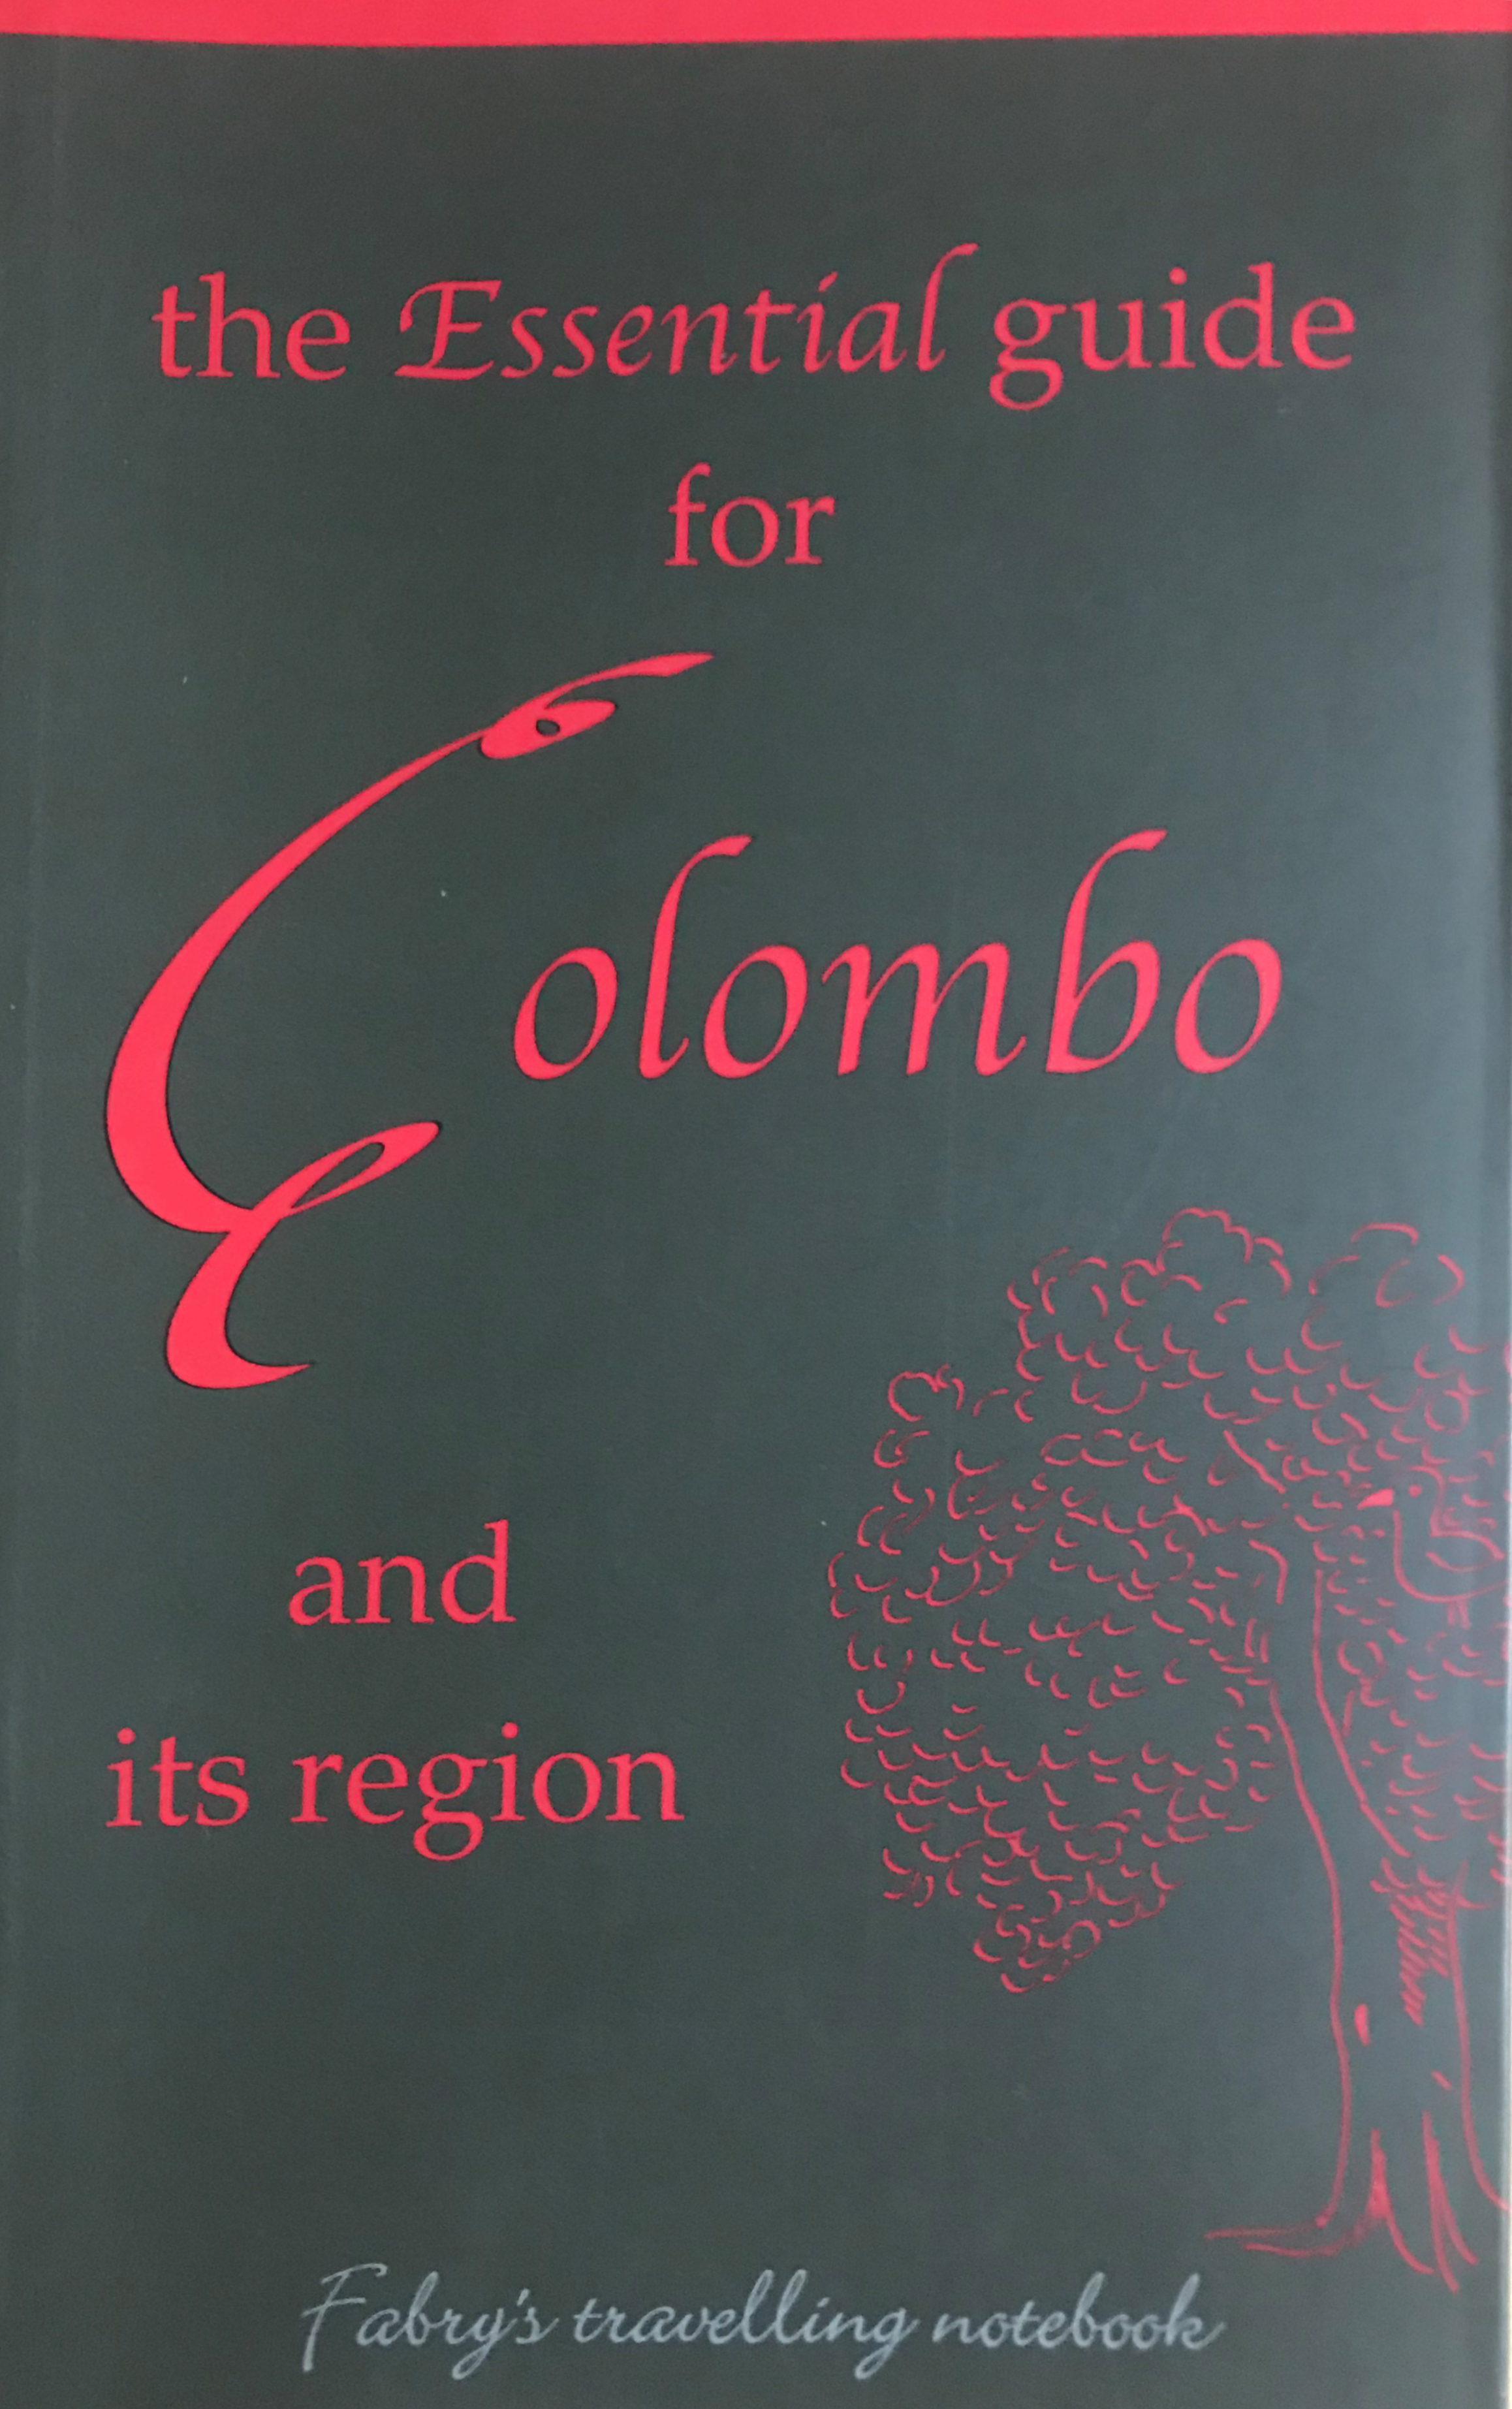 THE ESSENTIAL GUIDE FOR COLOMBO AND ITS REGION - 9789558736098